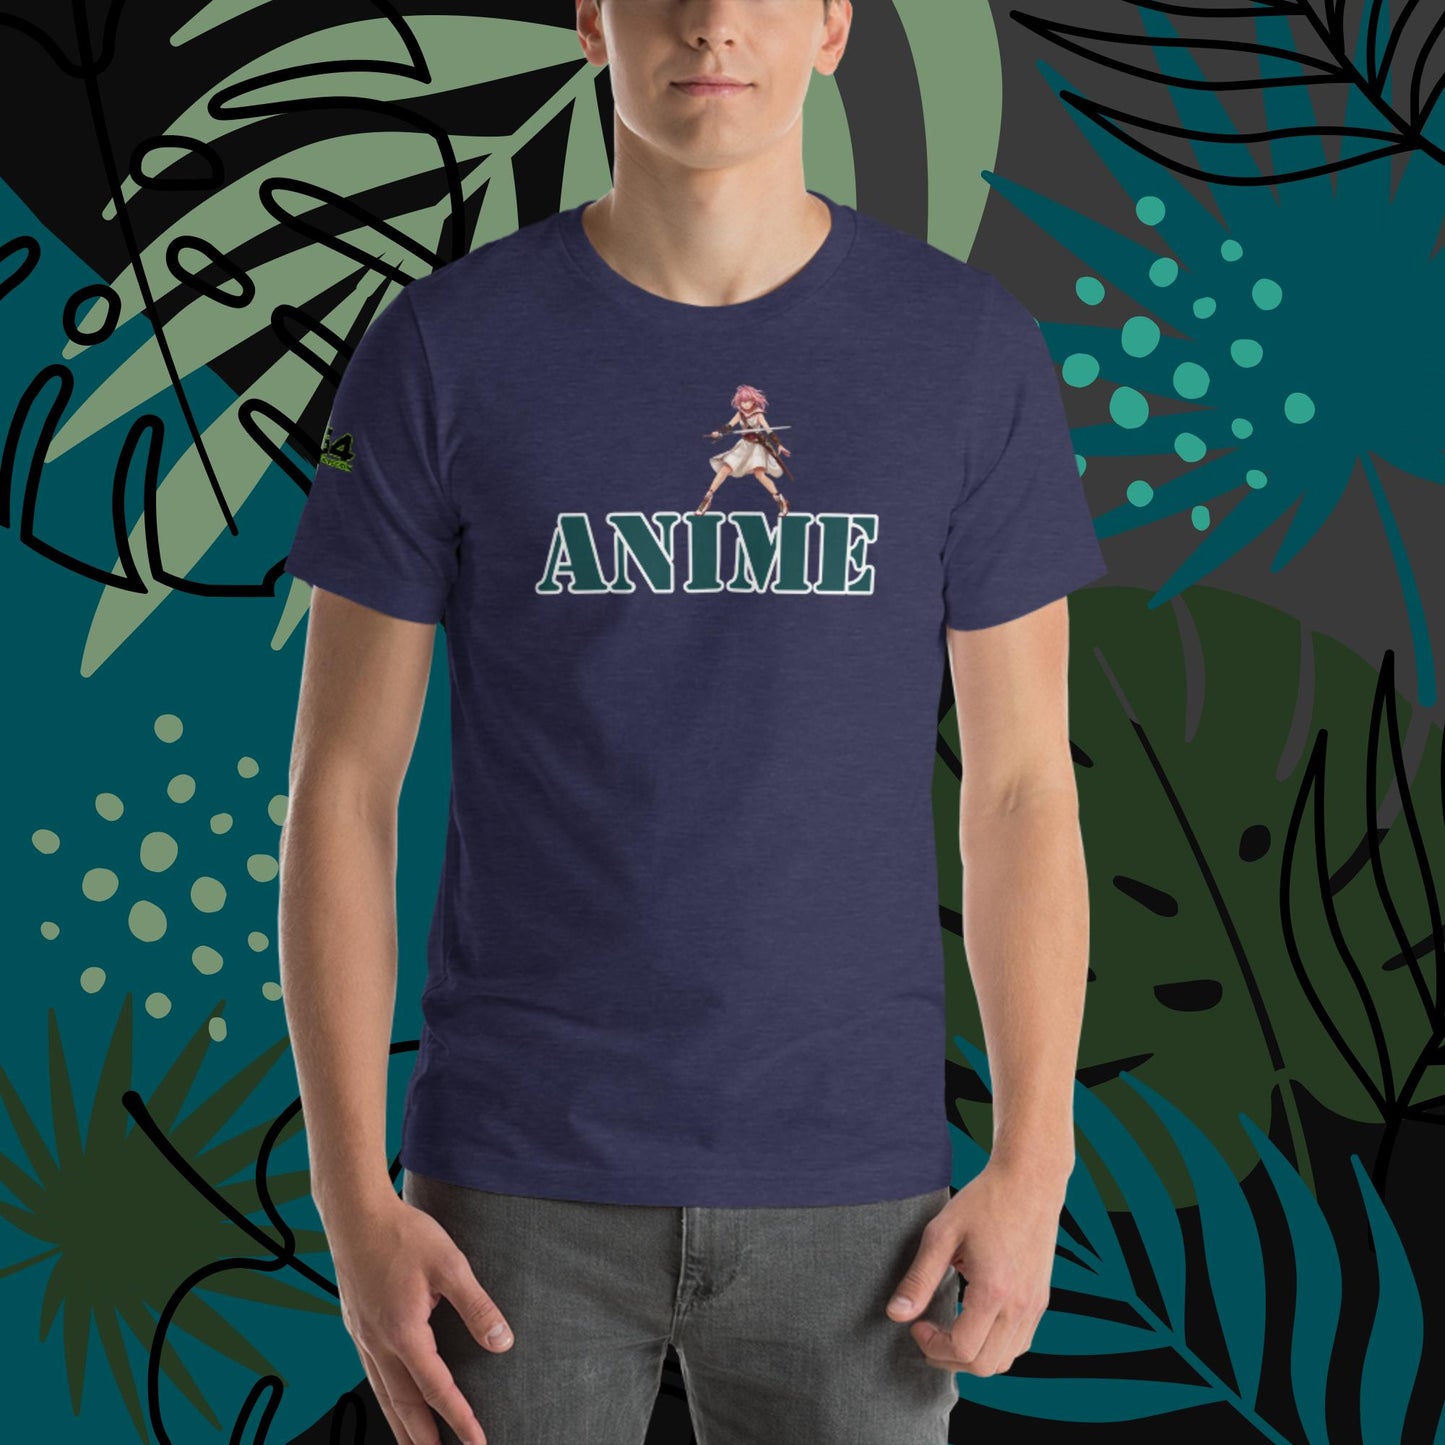 The World of Anime 954 Collection Unisex t-shirt